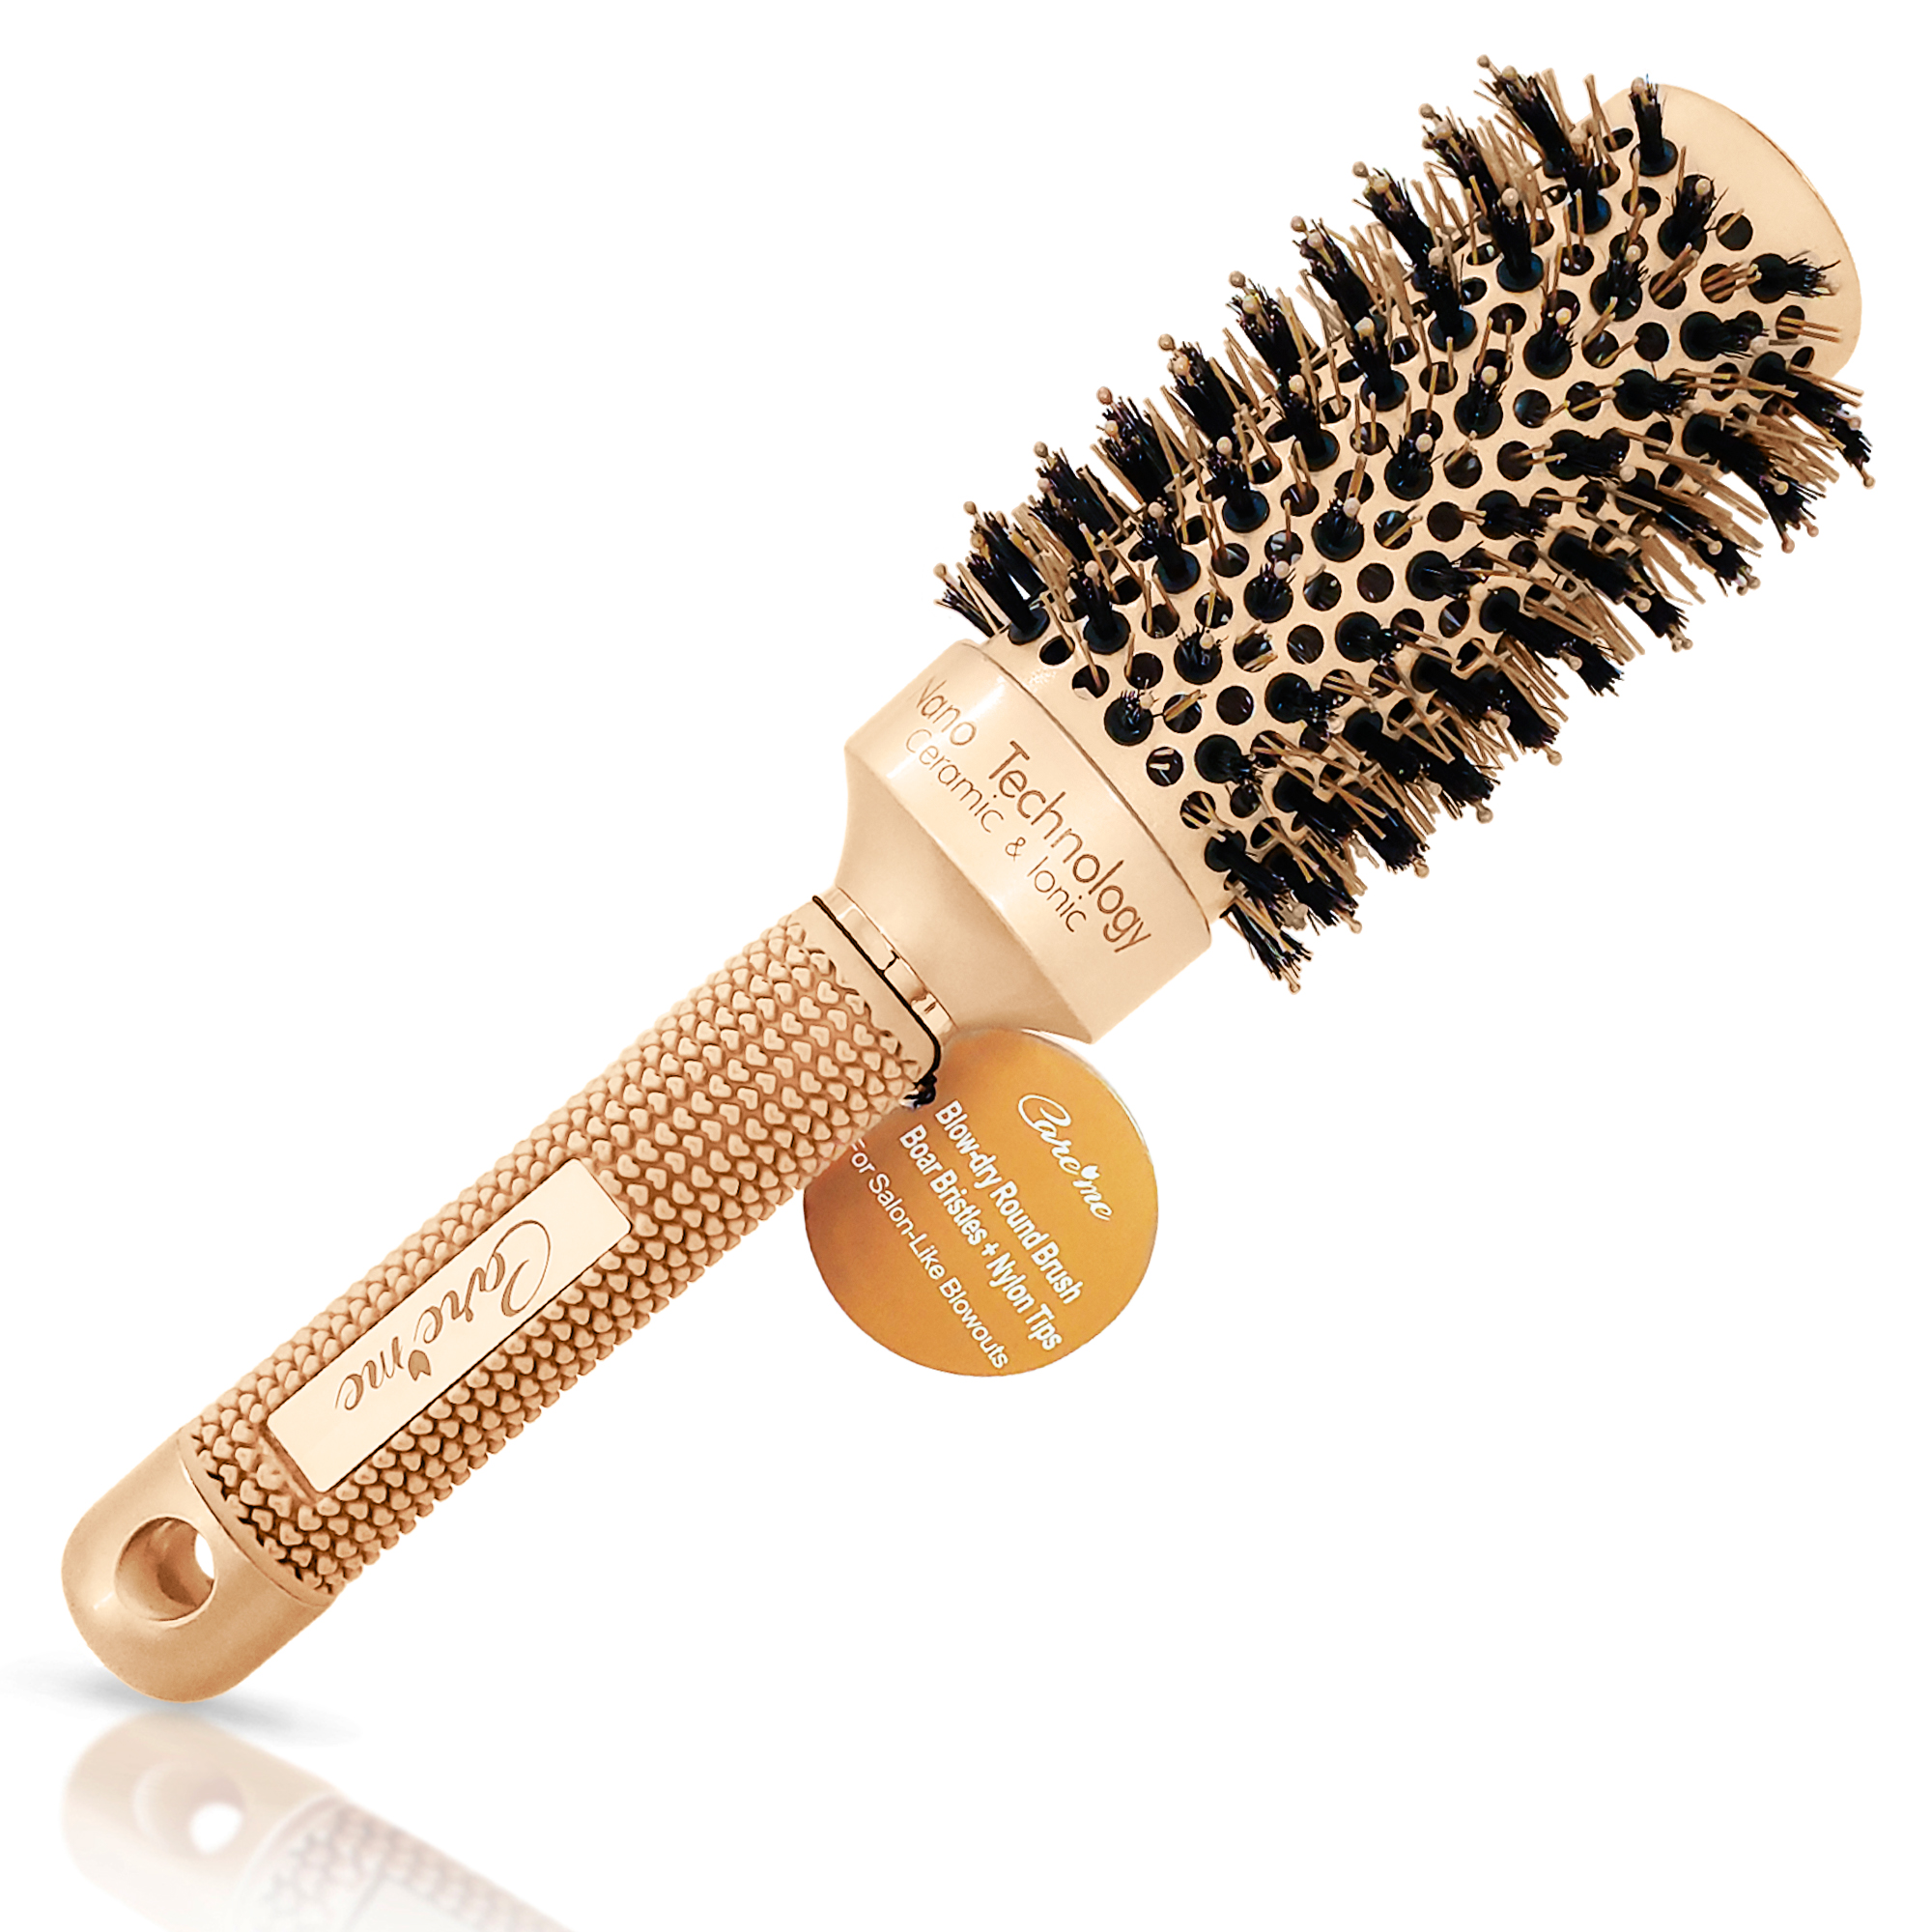 Care Me Blow Out Round Hair Brush